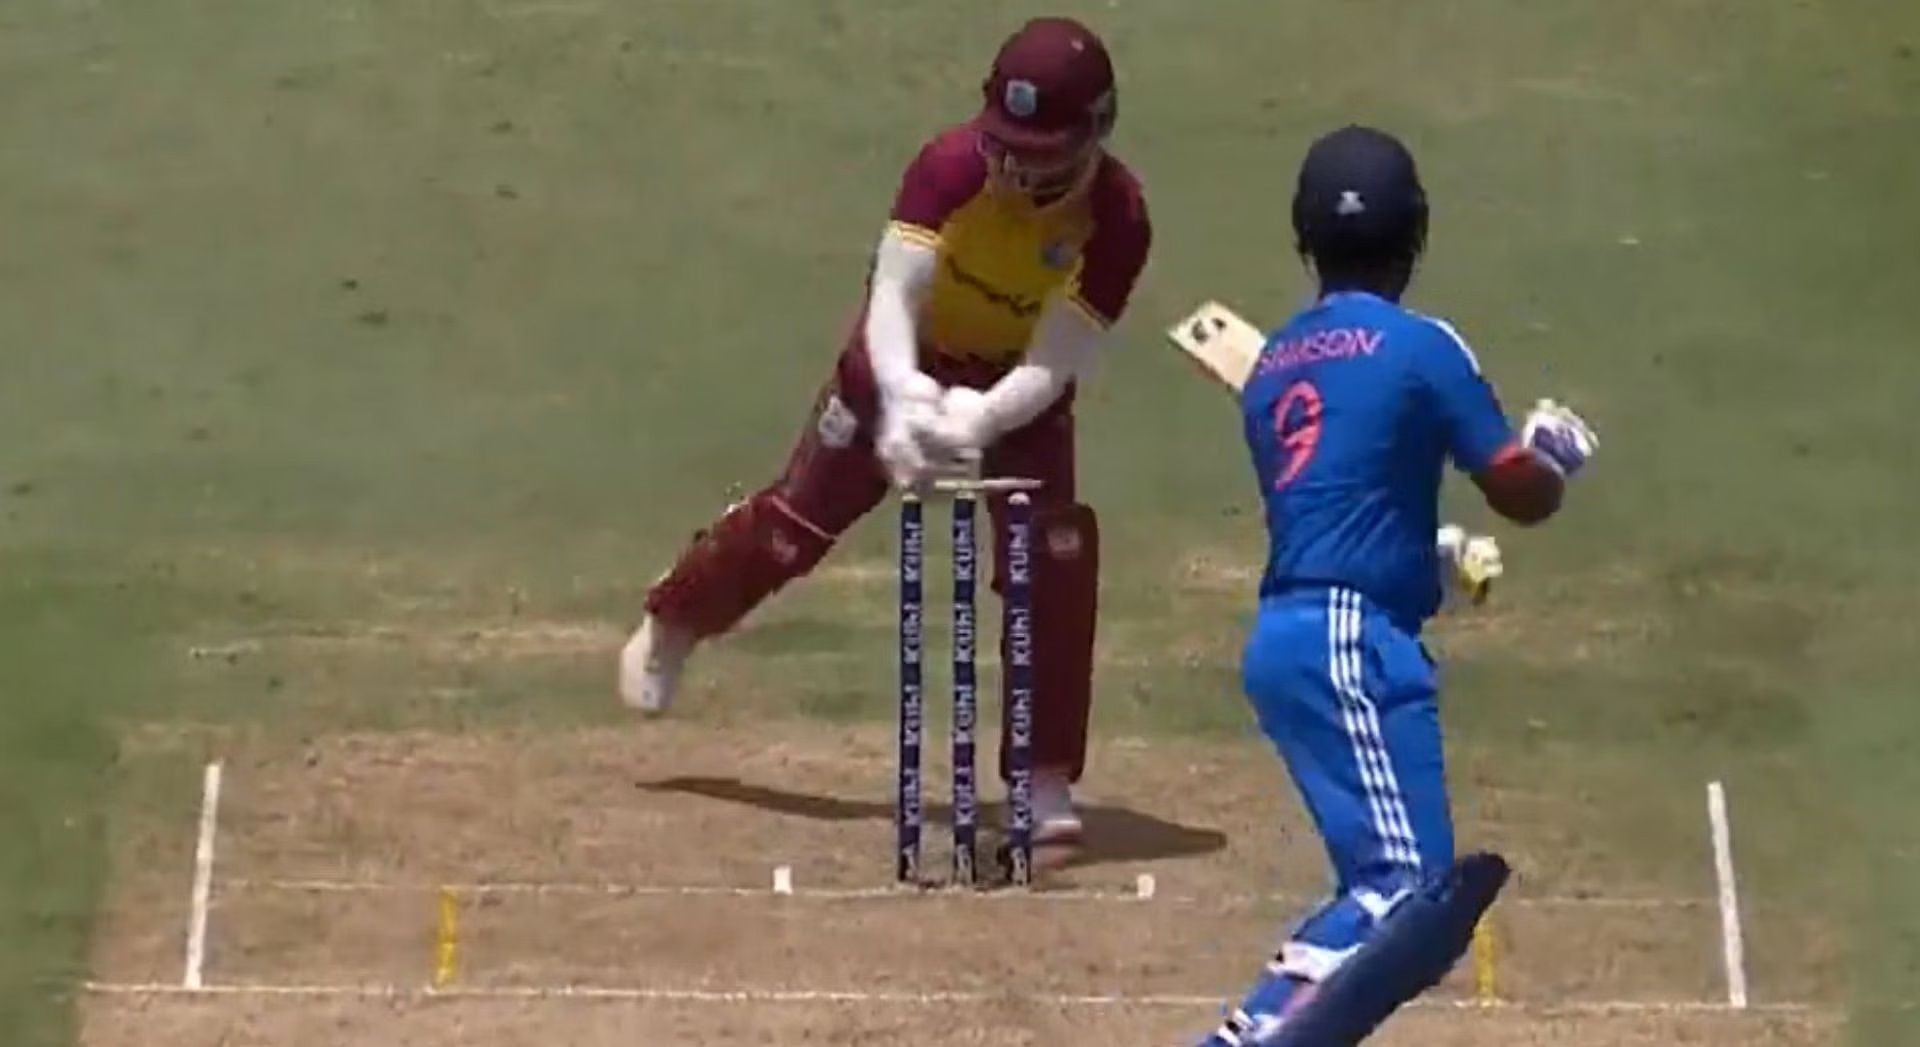 Sanju Samson lost his wicket to a reckless shot.